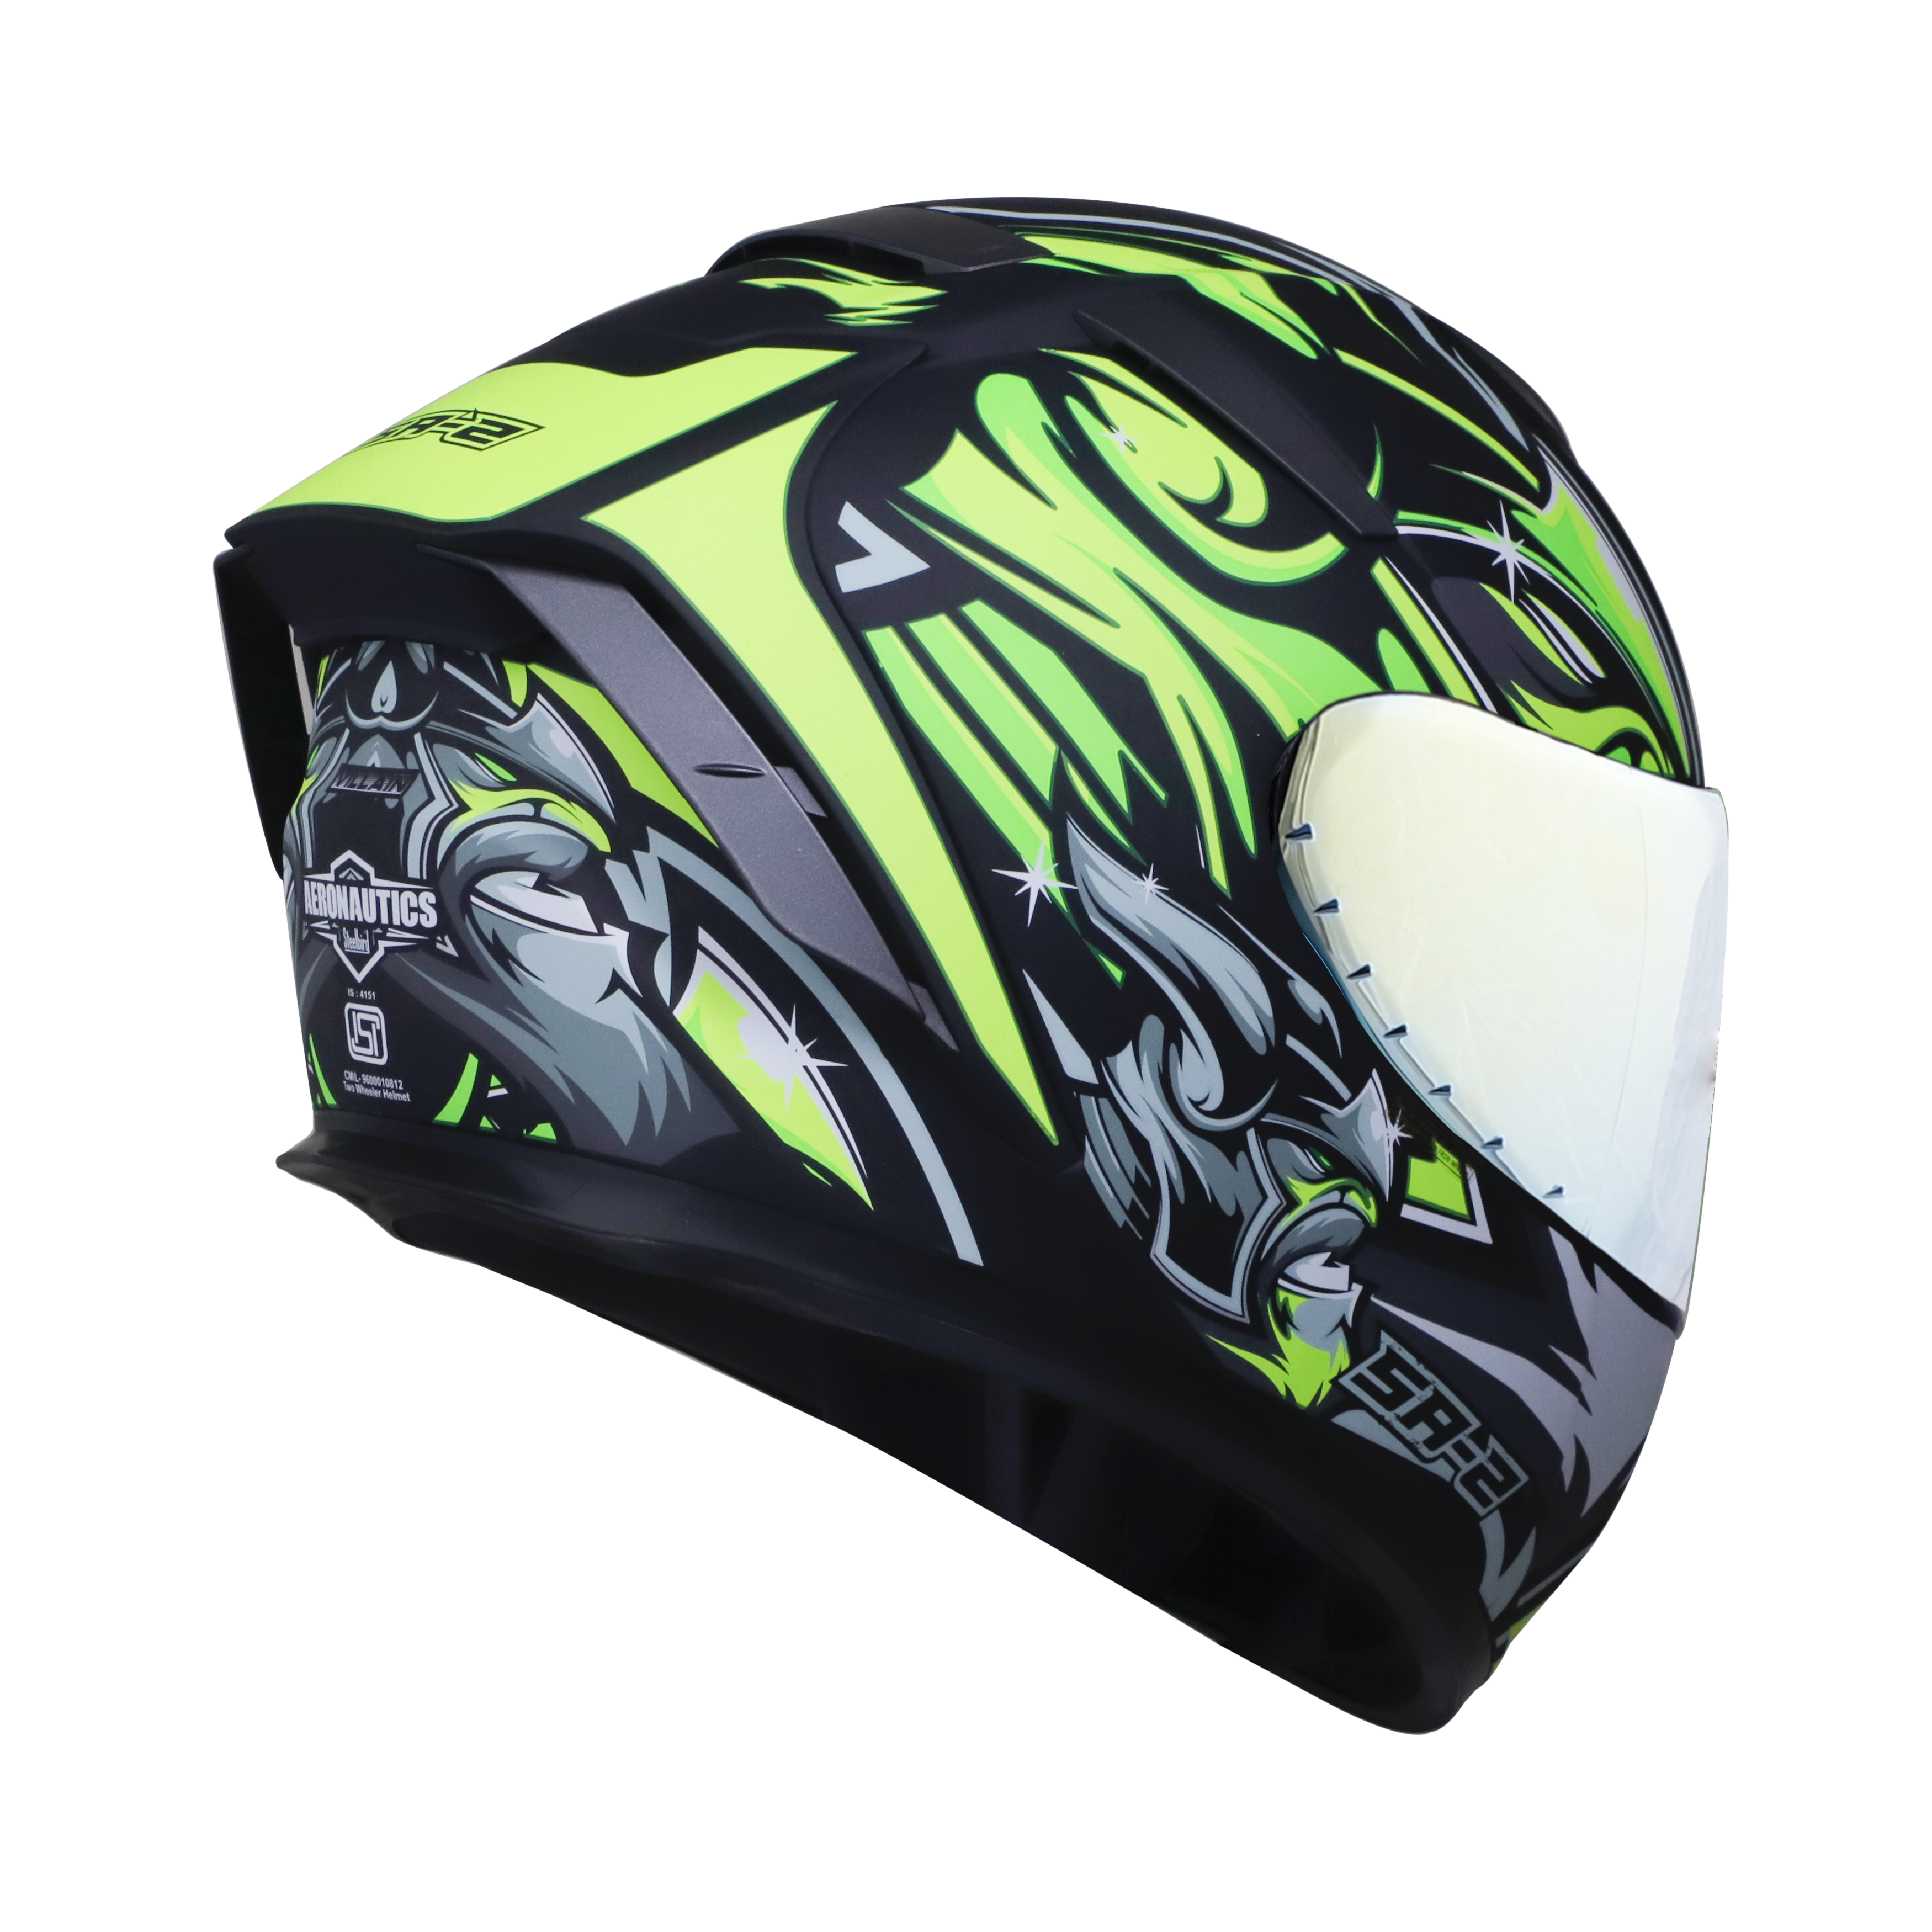 SA-2 VILLAIN GLOSSY BLACK WITH NEON (FITTED WITH CLEAR VISOR EXTRA CHROME GOLD VISOR FREE)